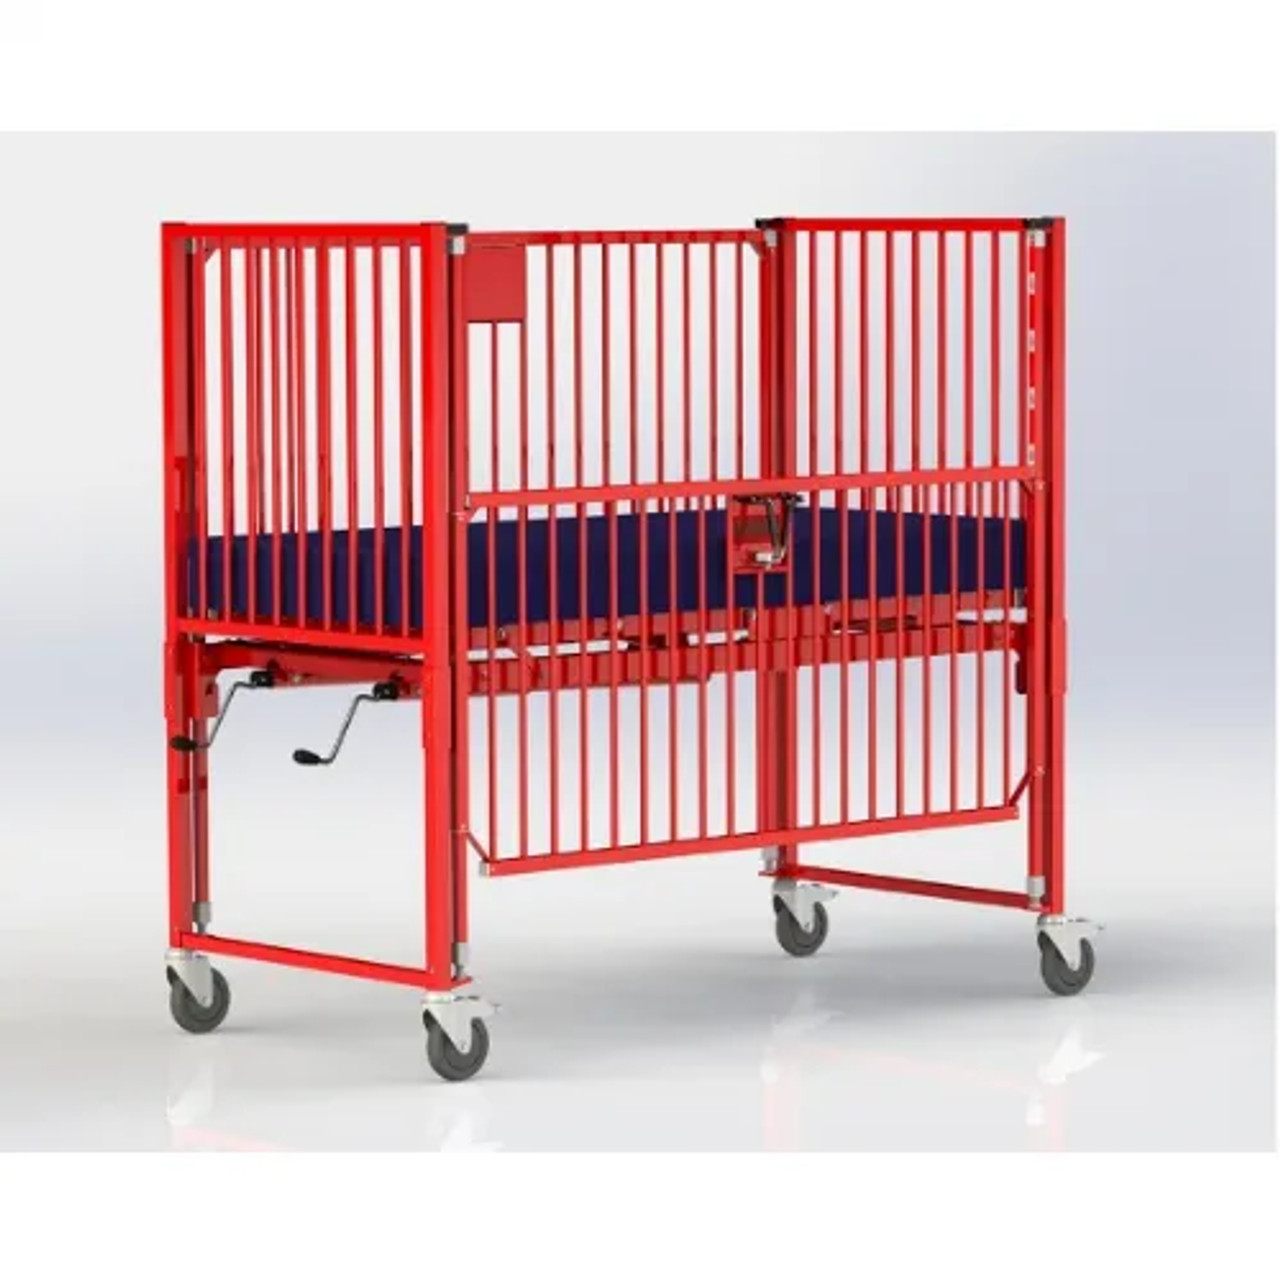 HARD Manufacturing Hospital-Style Crib for Homecare - Comfortable | 72"L x 36"W-Chicken Pieces